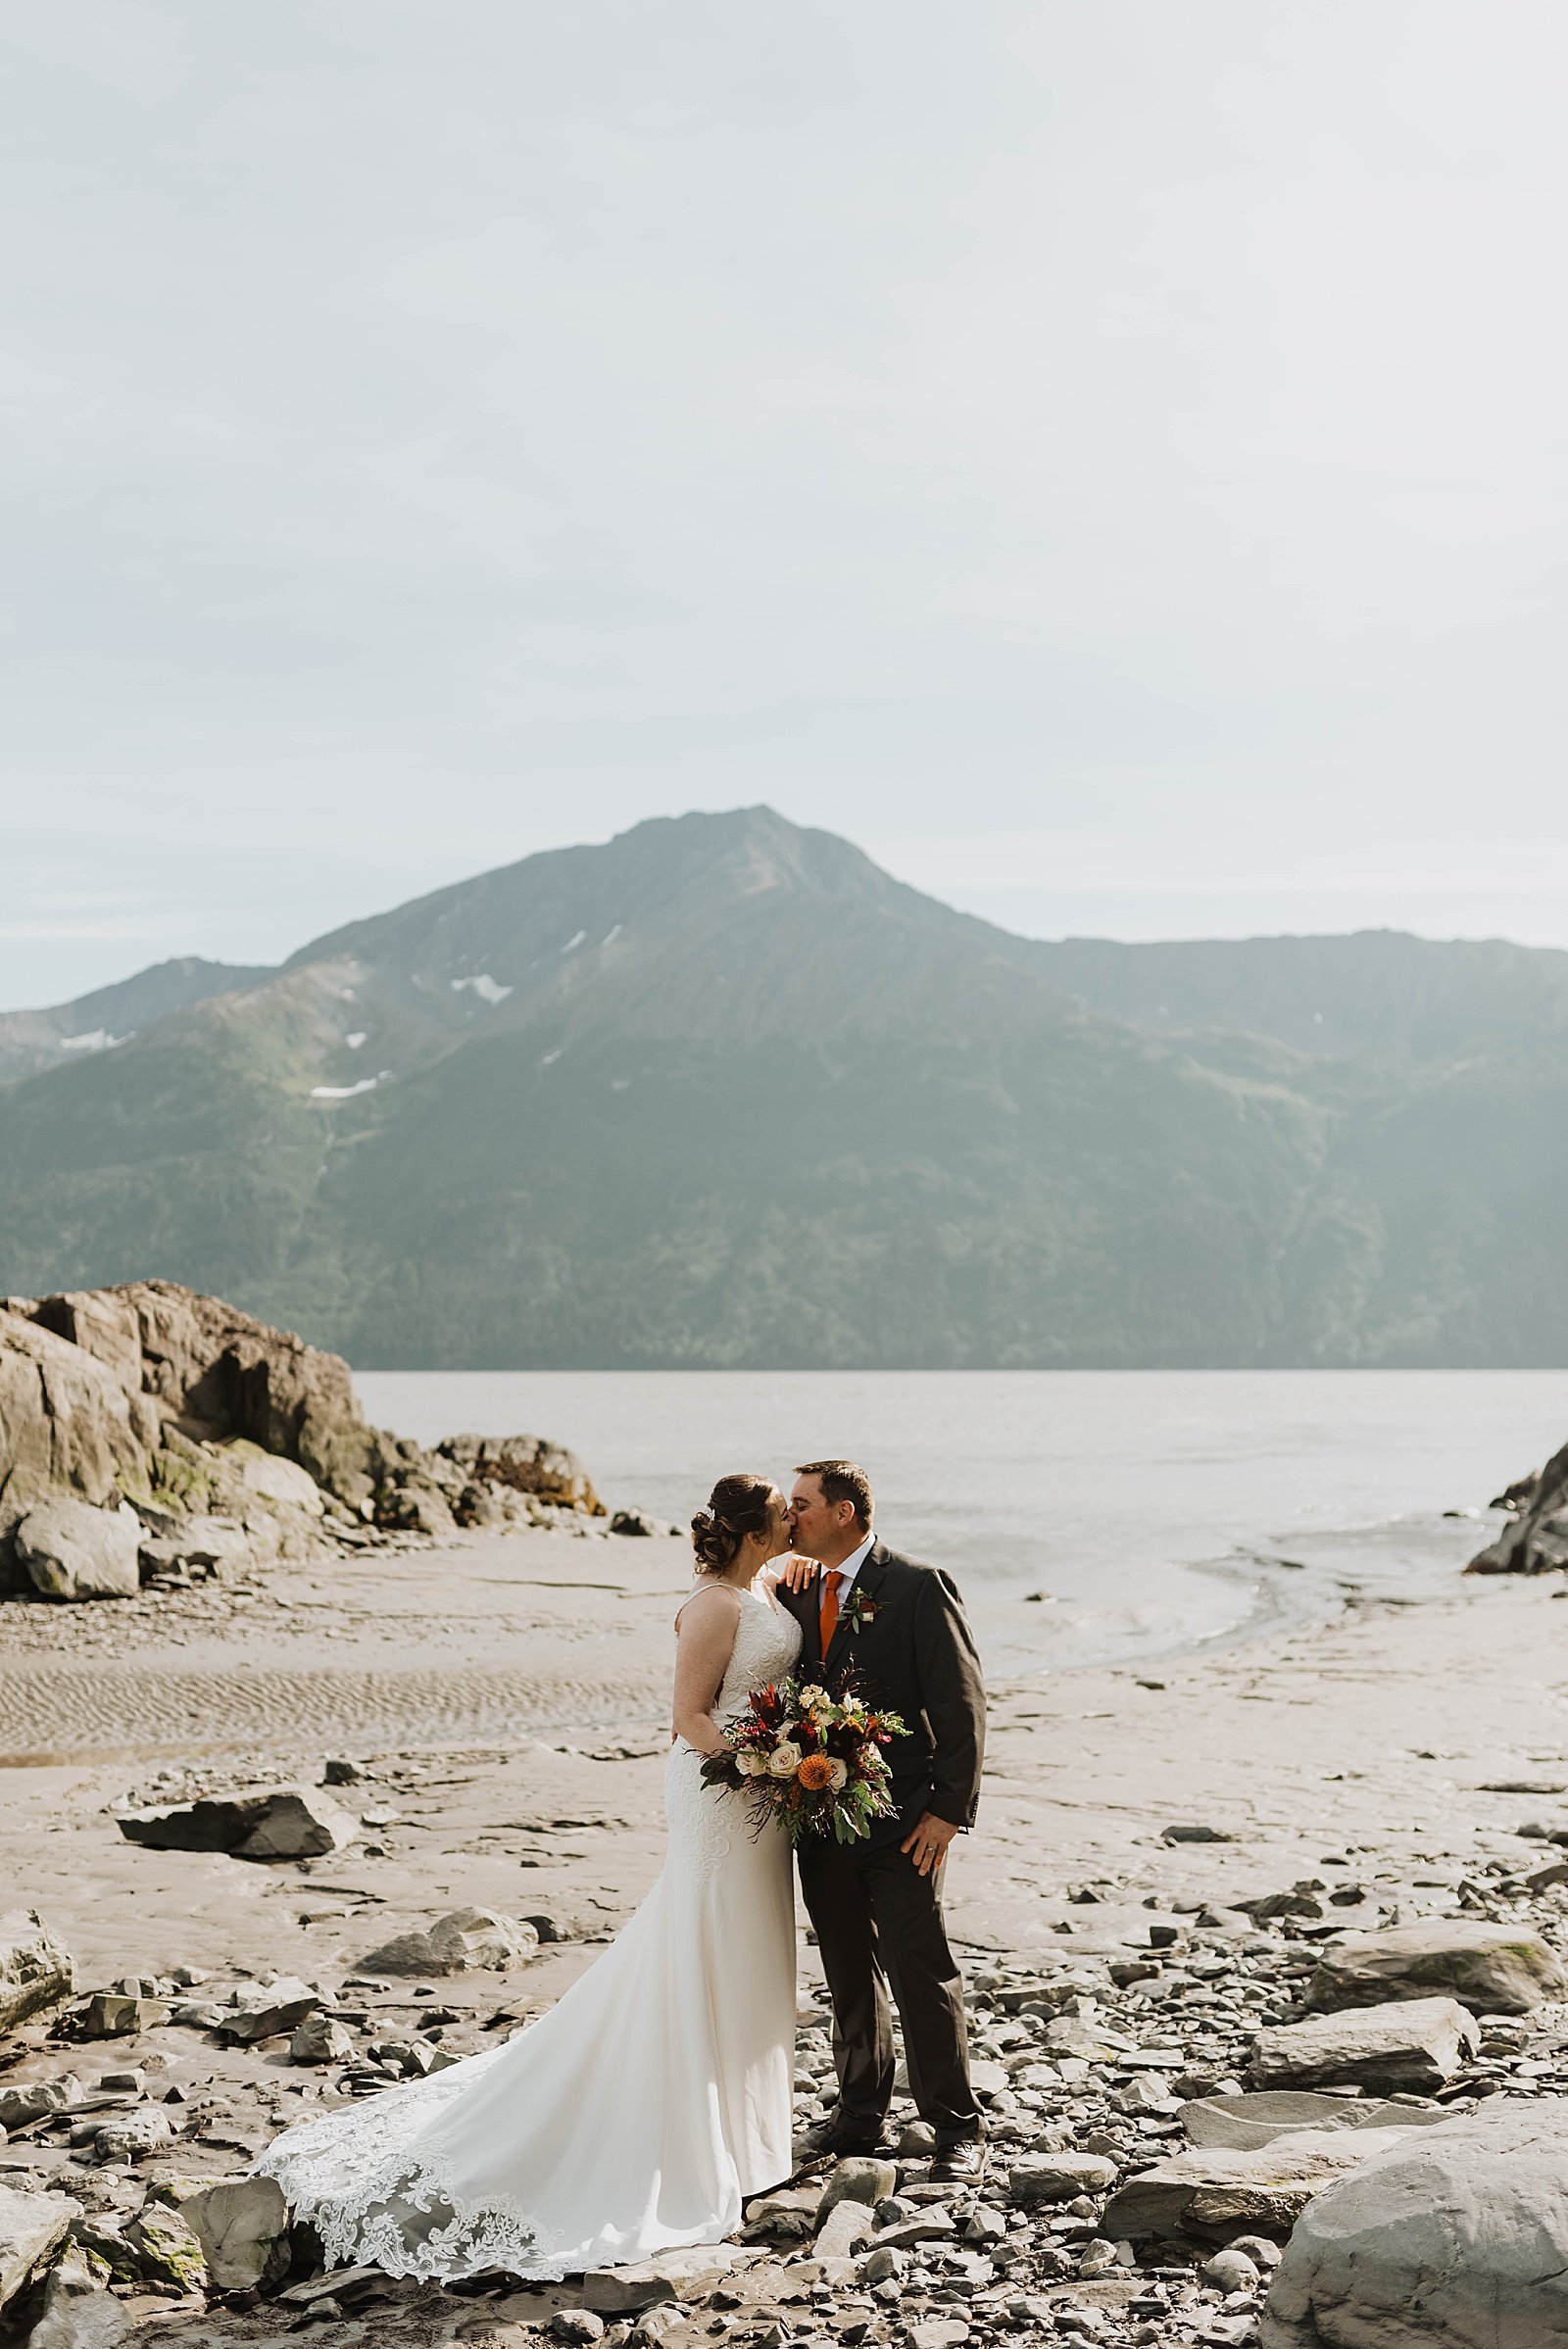  Bride and groom kissing with a large mountain and lake behind them  